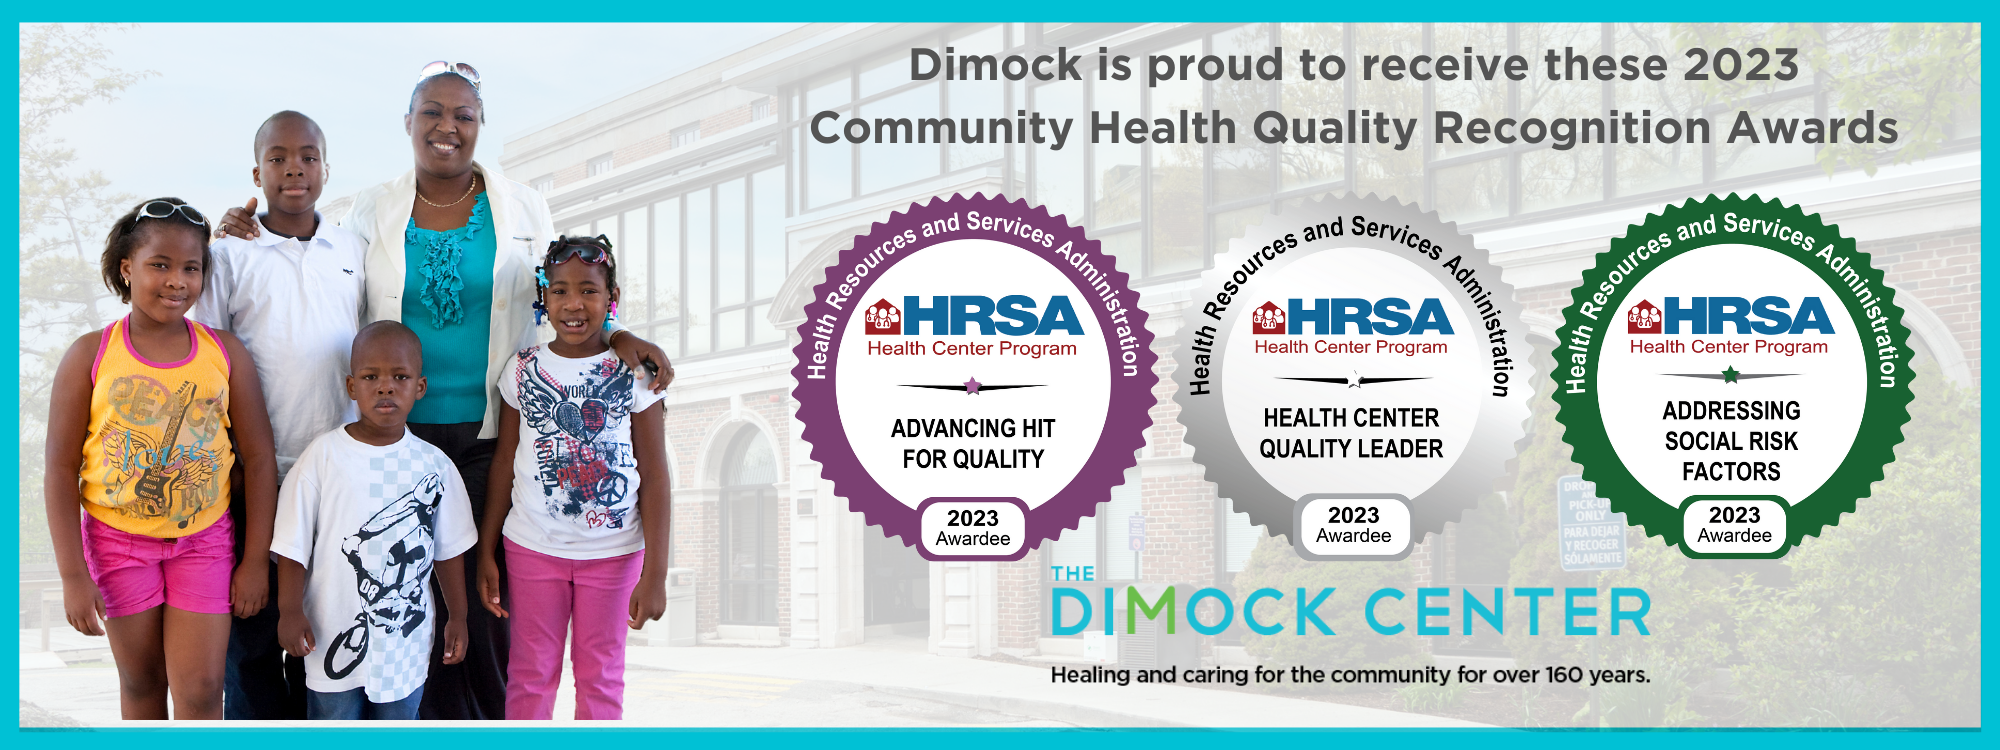 Dimock is proud to receive these 2023 Community Health Quality Recognition Awards